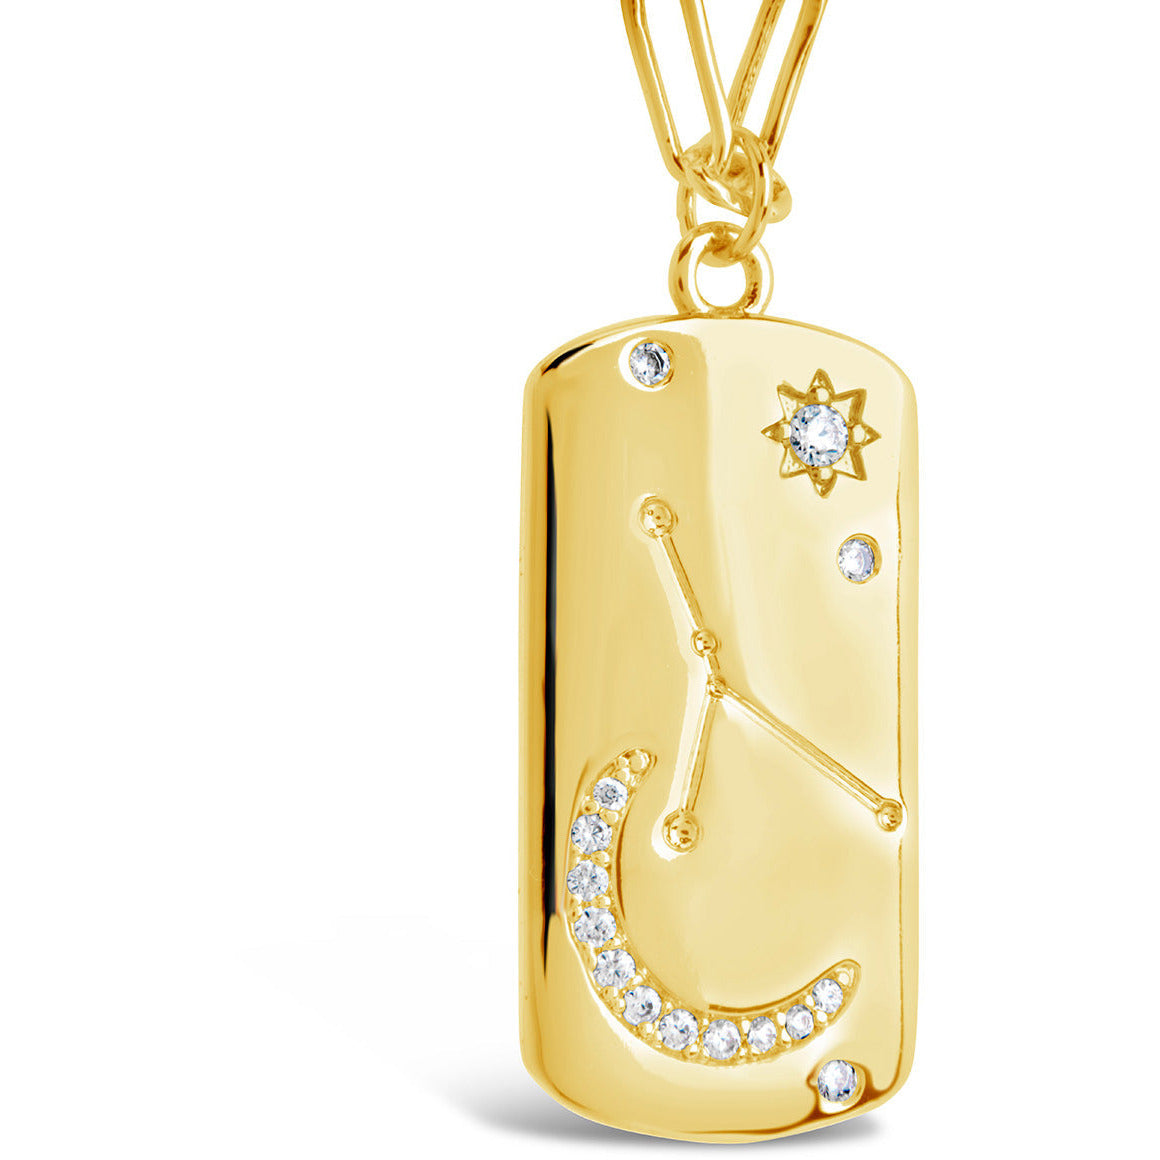 Constellation Dog Tag Necklace by Sterling Forever